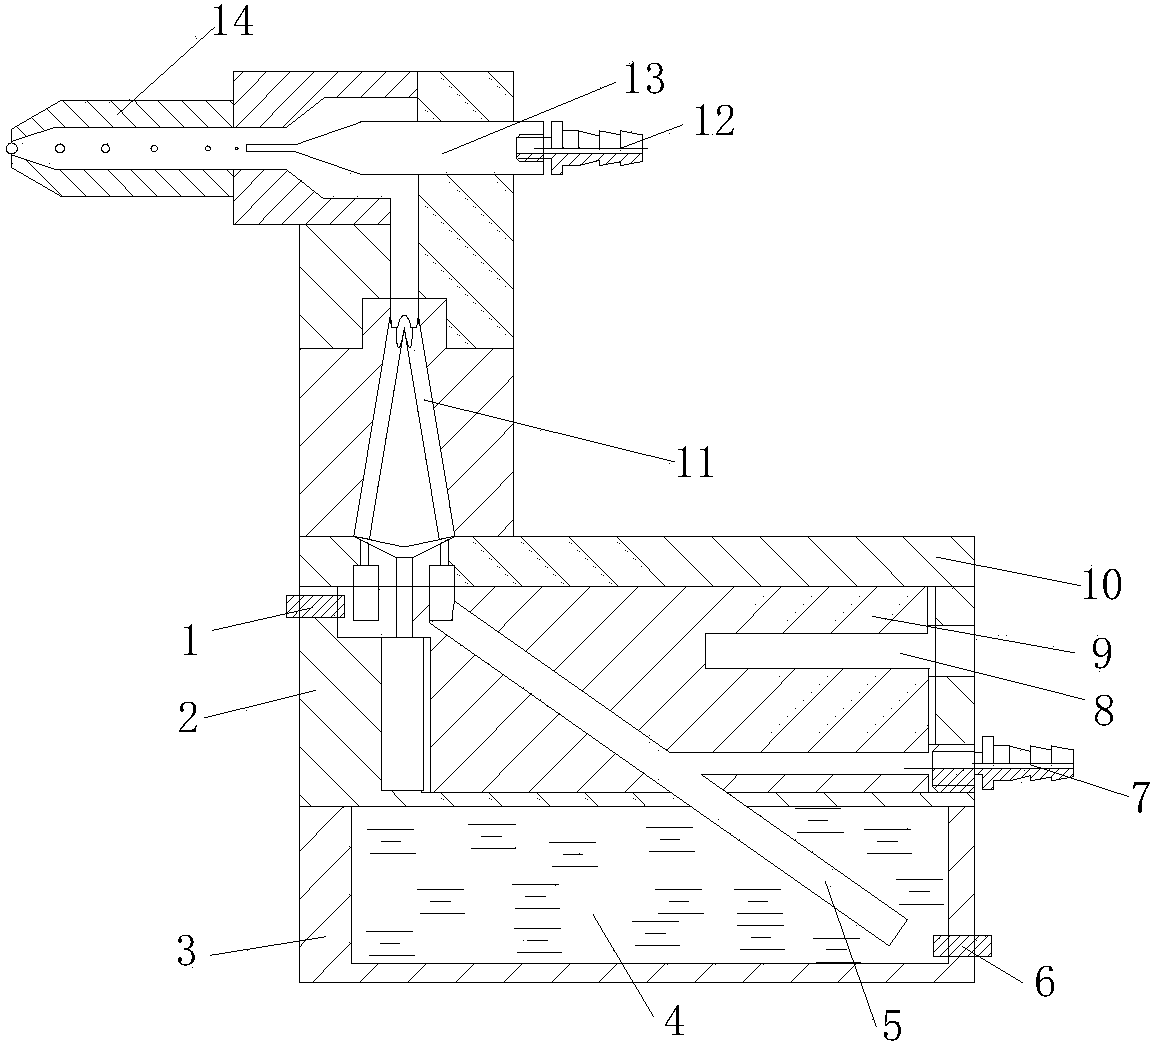 Number concentration measurement device of atmospheric ultrafine particles